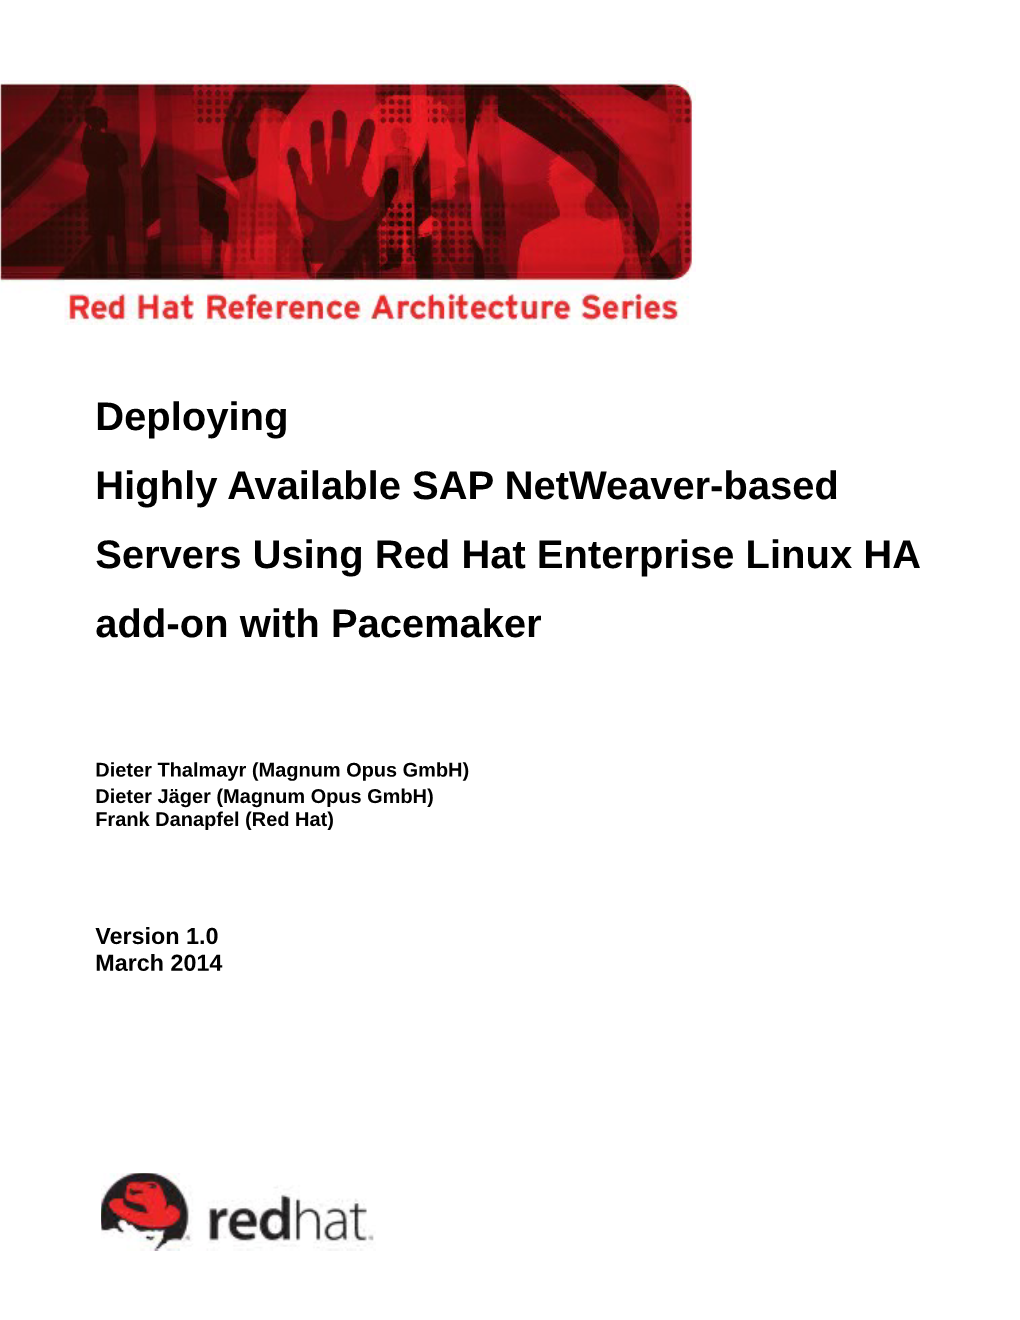 Deploying Highly Available SAP Netweaver-Based Servers Using Red Hat Enterprise Linux HA Add-On with Pacemaker